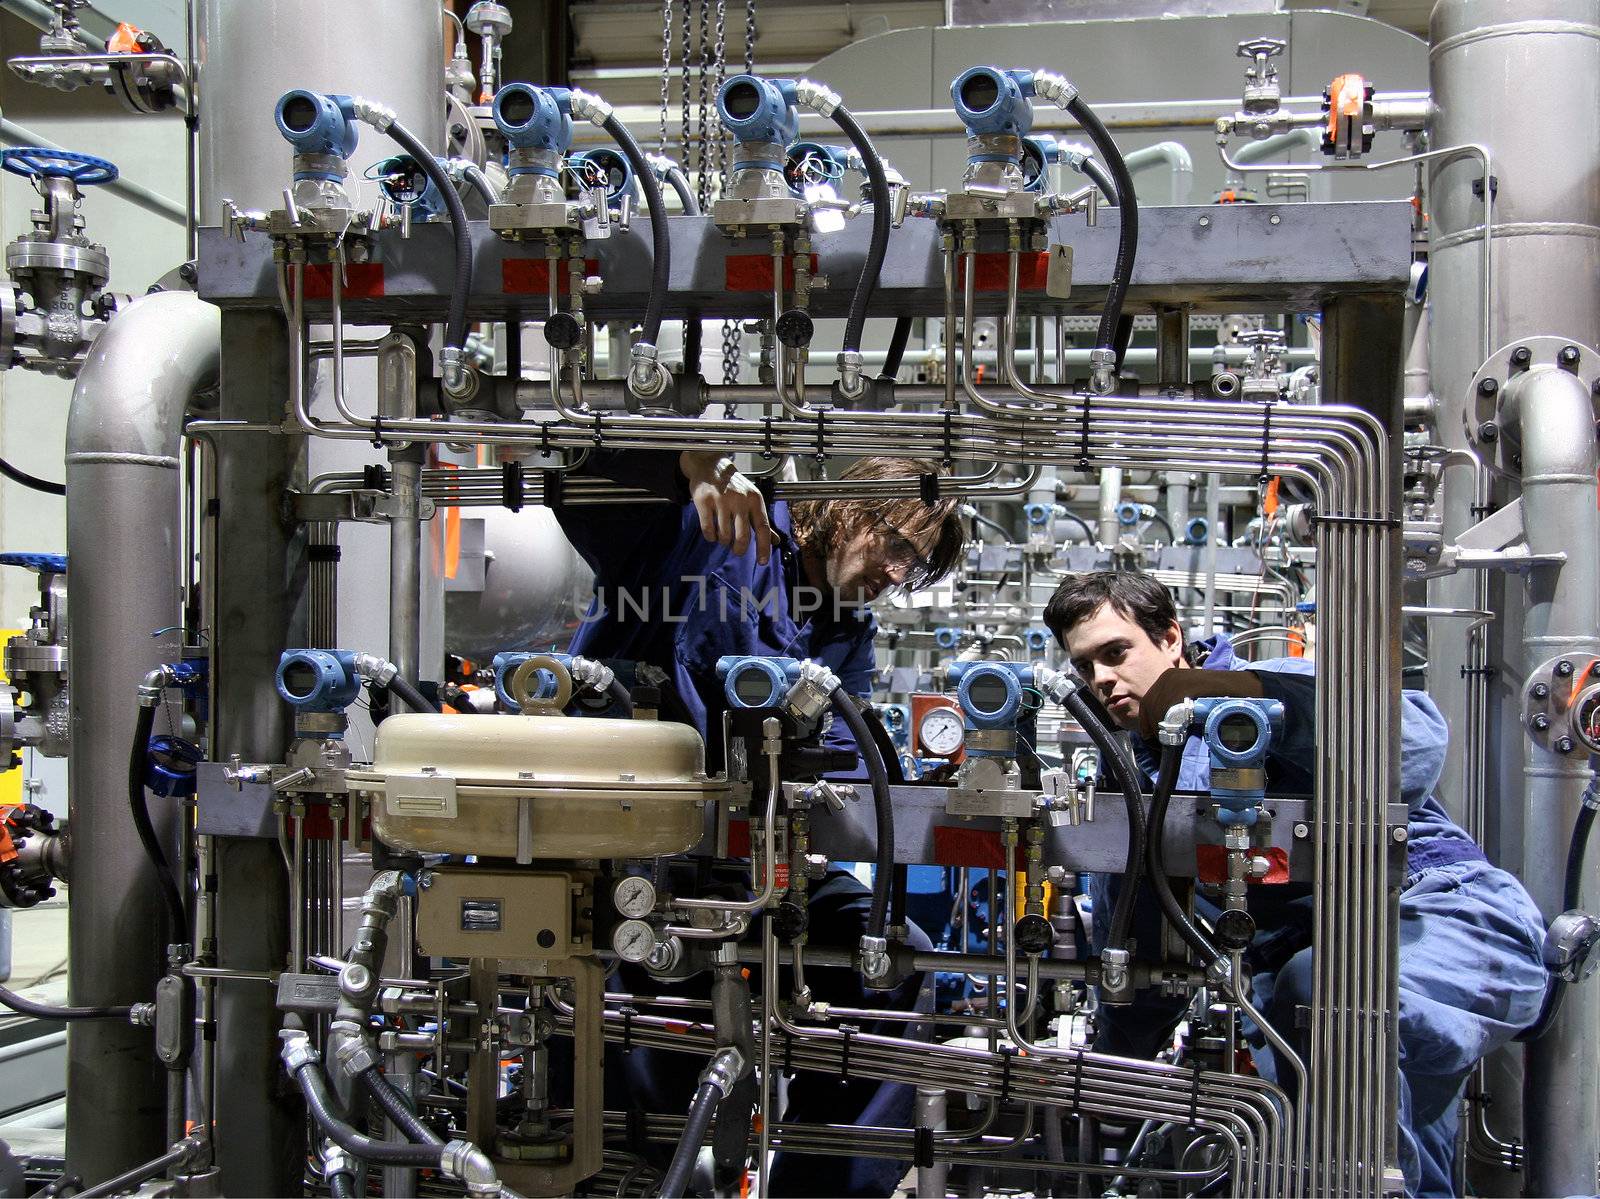 Two technician working on a machinery